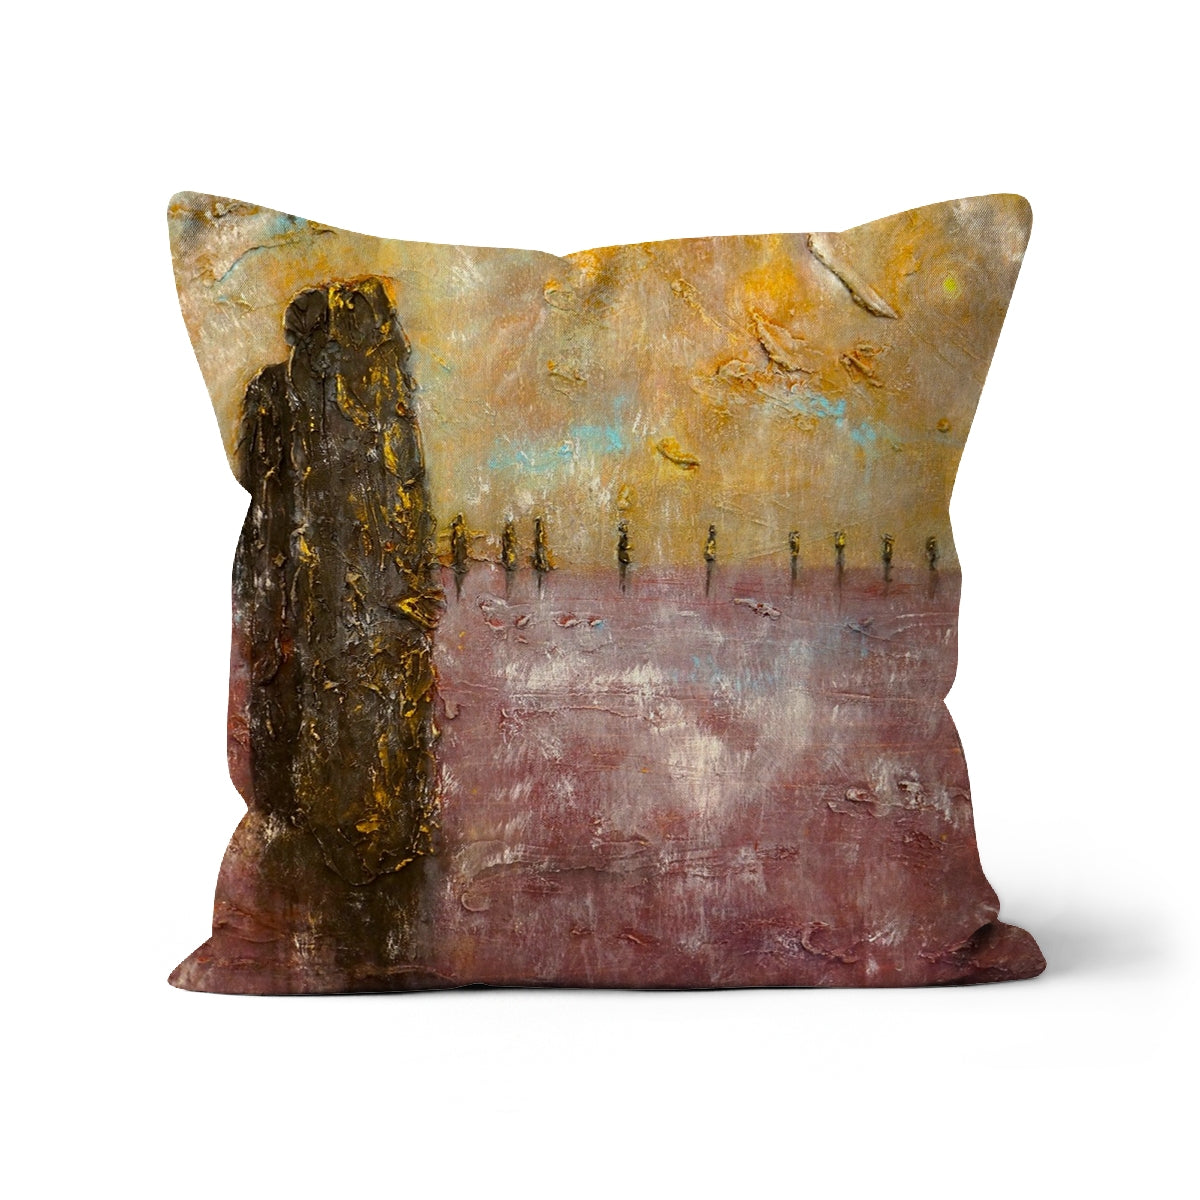 Brodgar Mist Orkney Art Gifts Cushion-Cushions-Orkney Art Gallery-Canvas-12"x12"-Paintings, Prints, Homeware, Art Gifts From Scotland By Scottish Artist Kevin Hunter